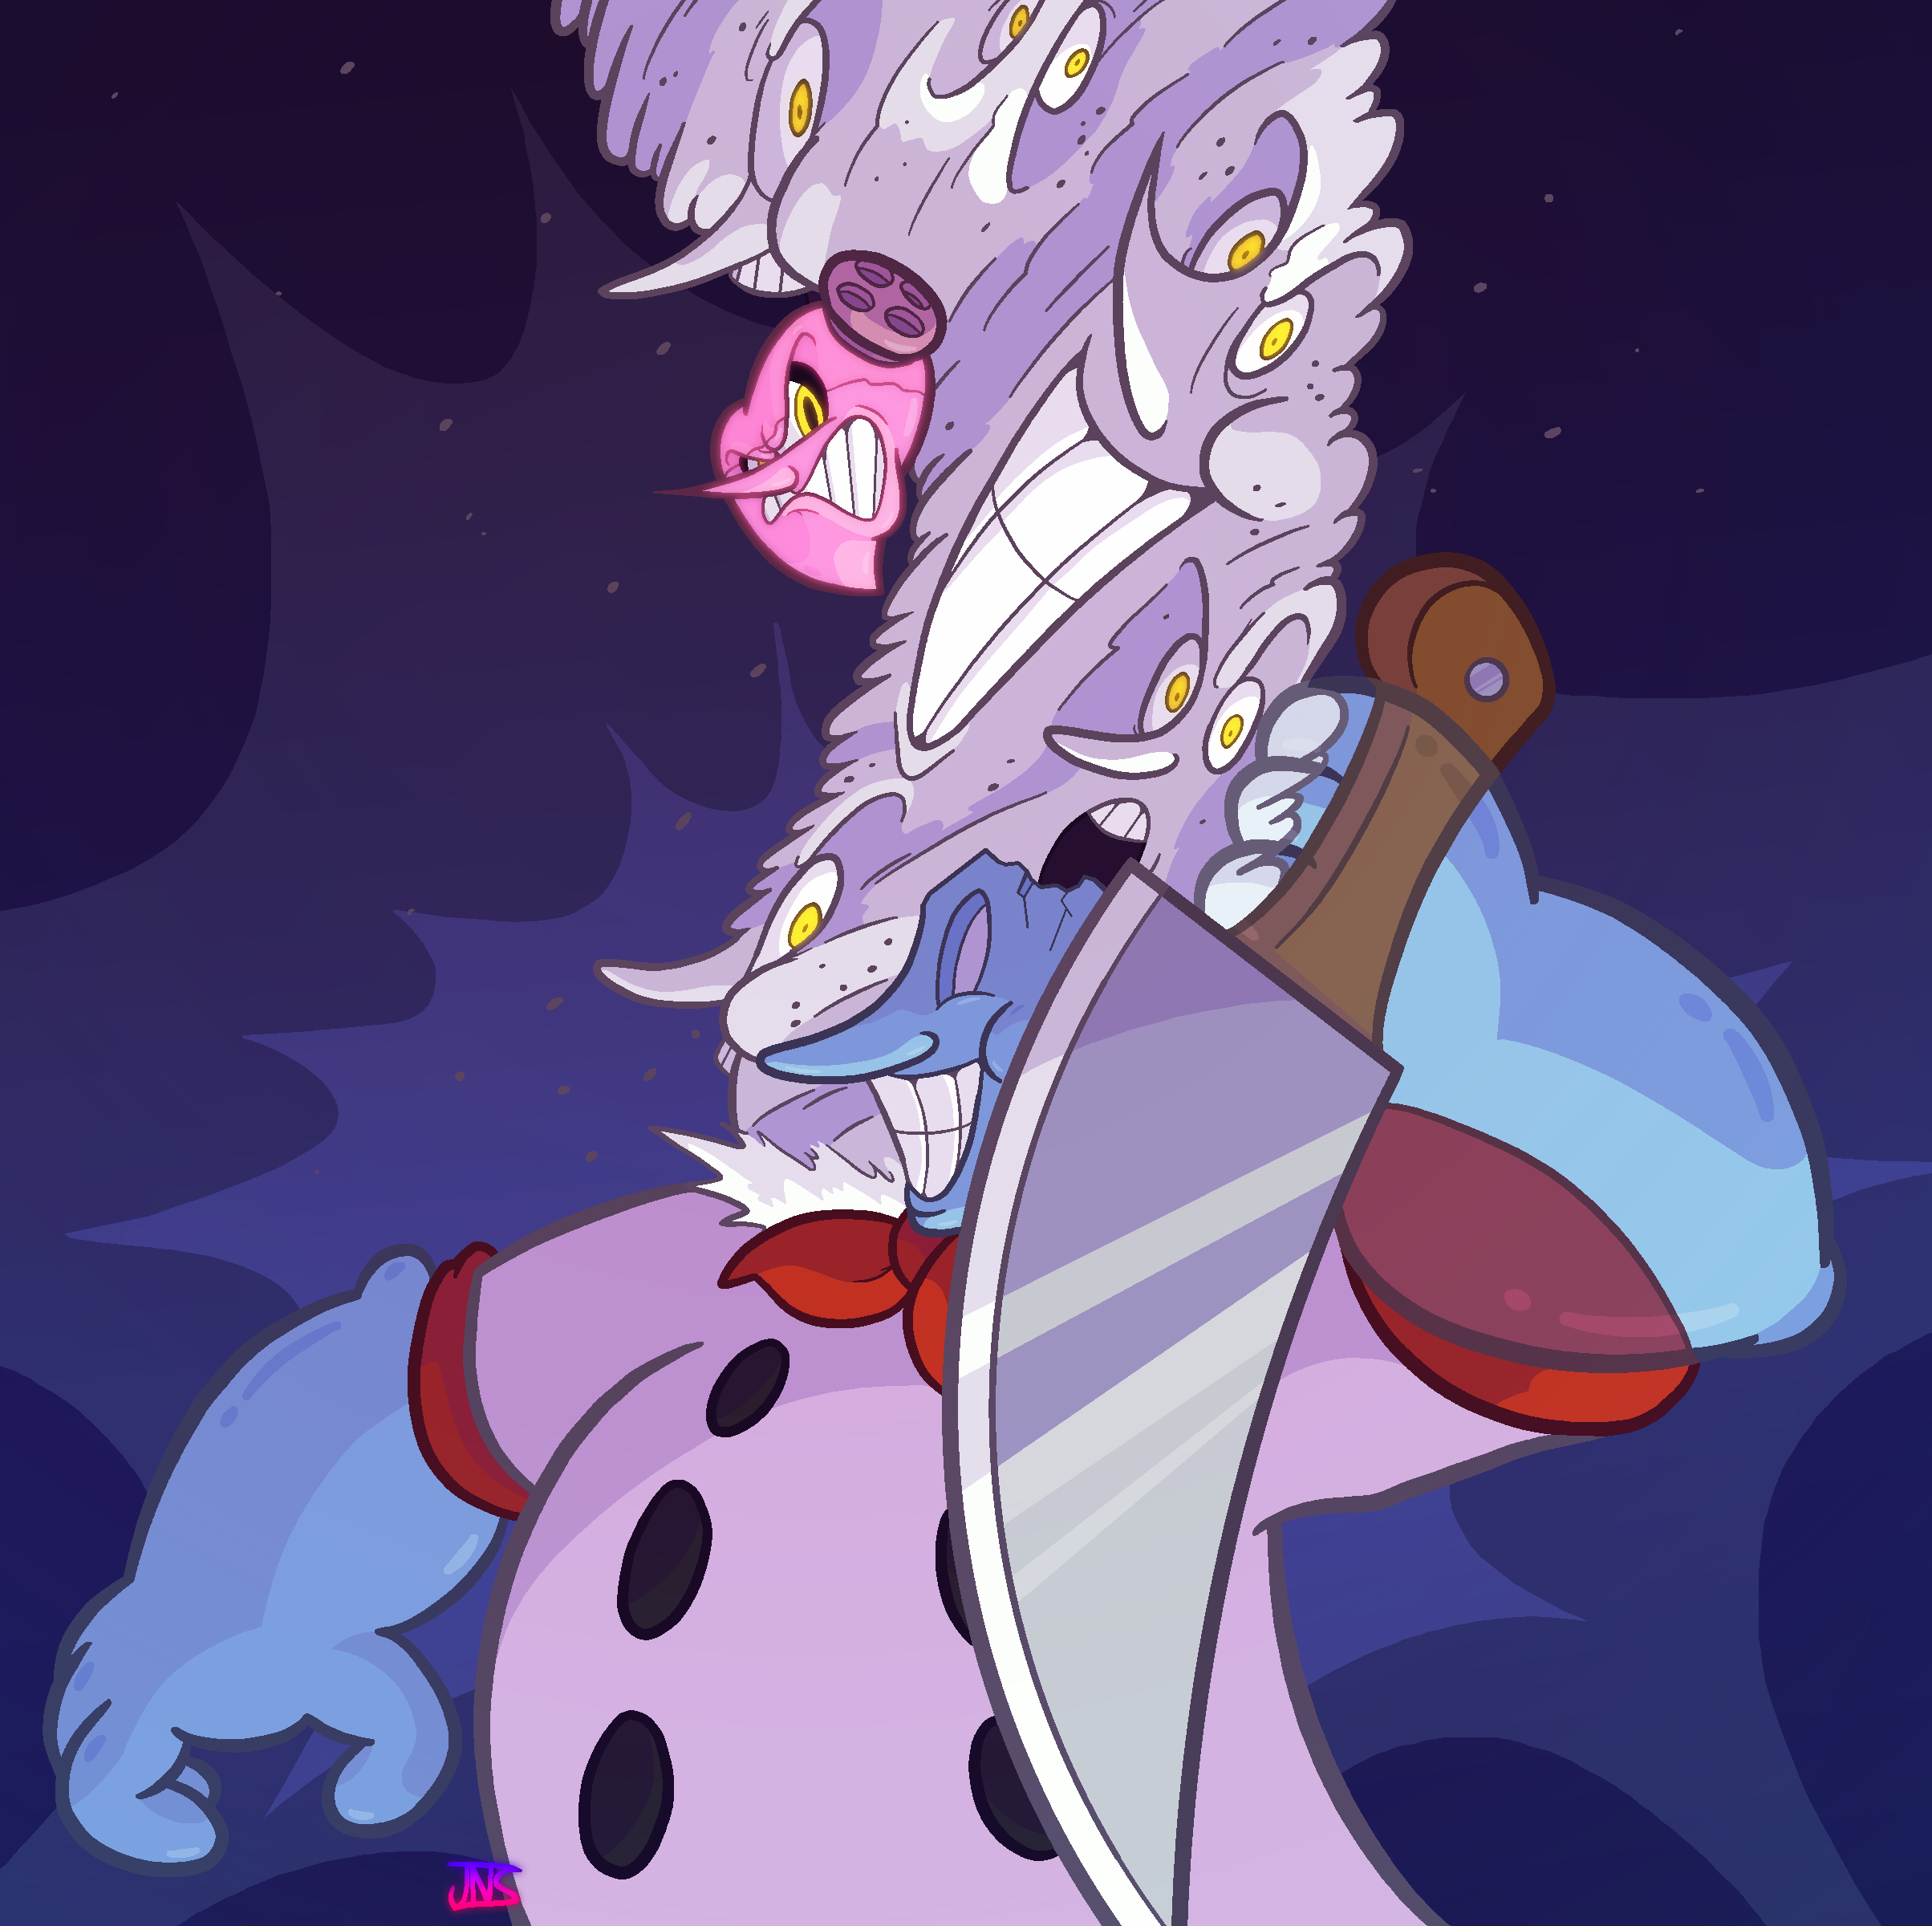 Chef Saltbaker from Cuphead's DLC brandishing a knife with his head erupting into salt pillars